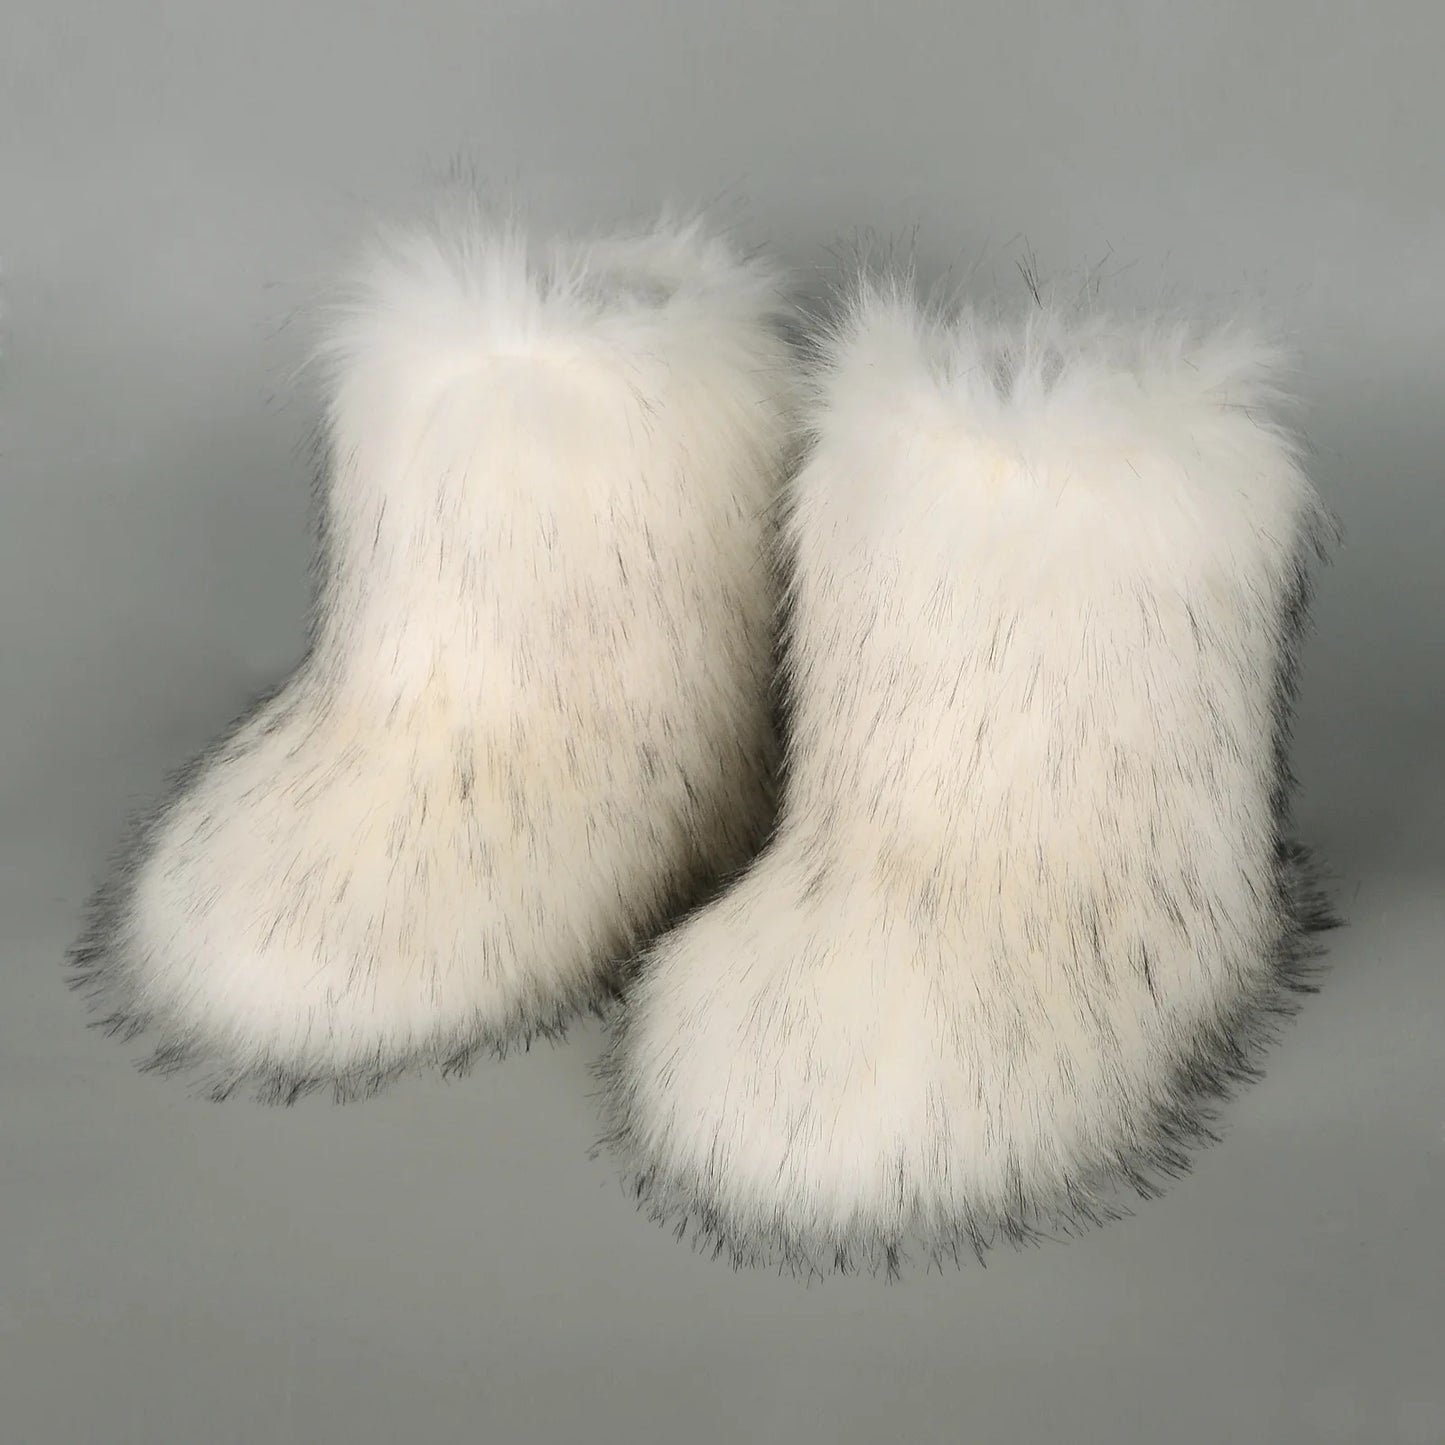 Winter Fuzzy Boots Women Furry Shoes Fluffy Fur Snow Boots Plush lining Slip-on Rubber Flat Outdoor Bowtie Warm Ladies Footwear